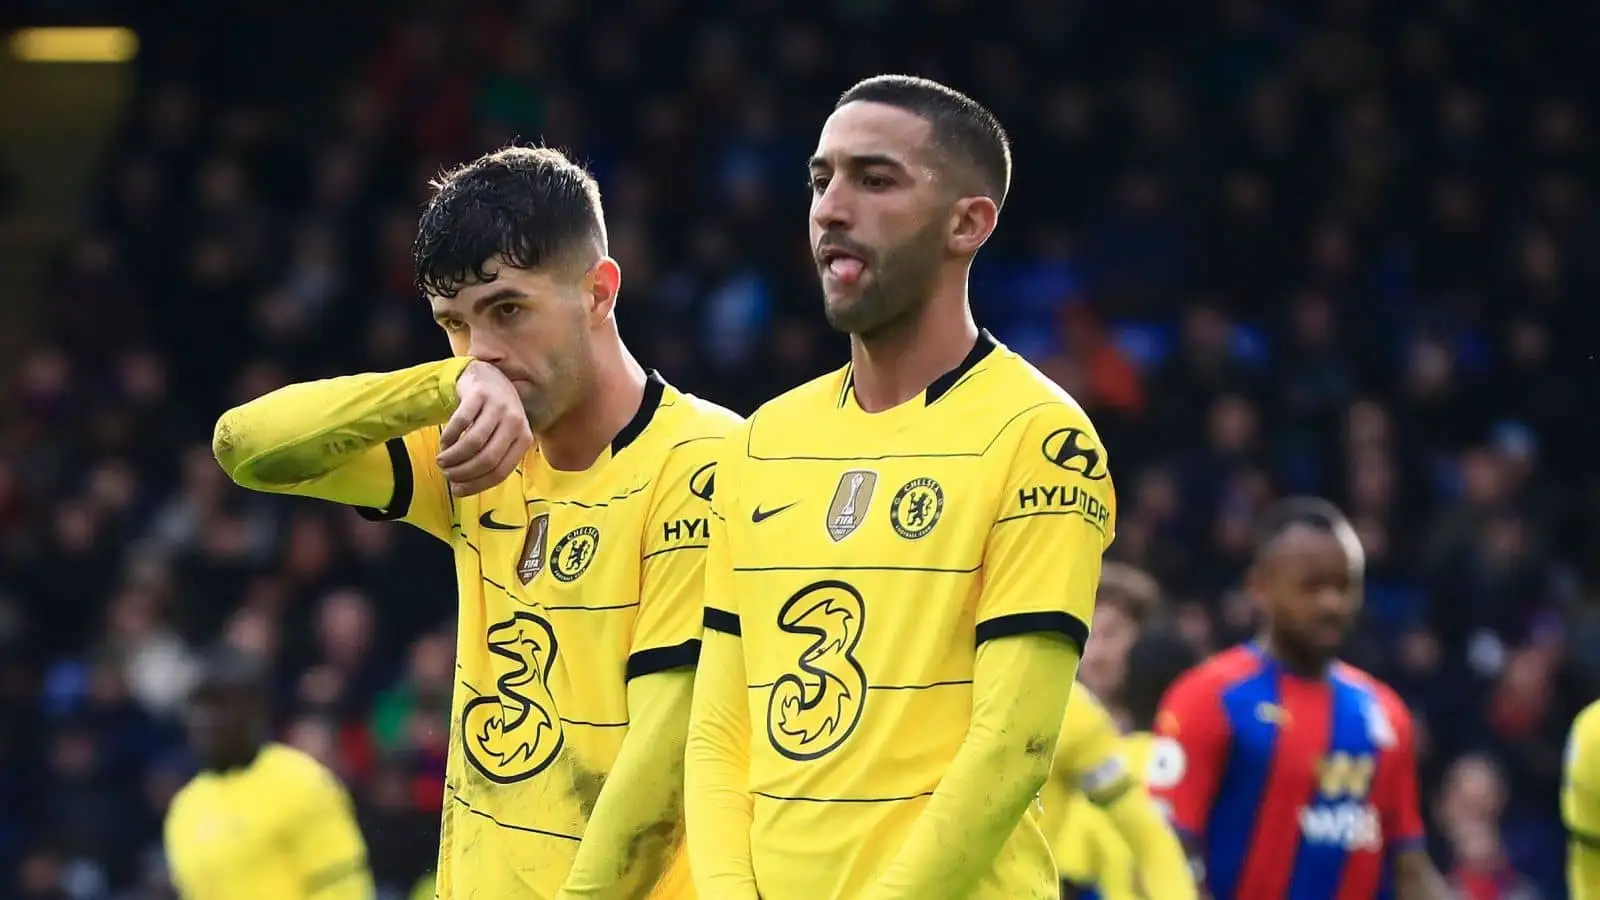 Christian Pulisic, Hakim Ziyech, Chelsea, form a defensive wall during Premier League game against Crystal Palace at Selhurst Park